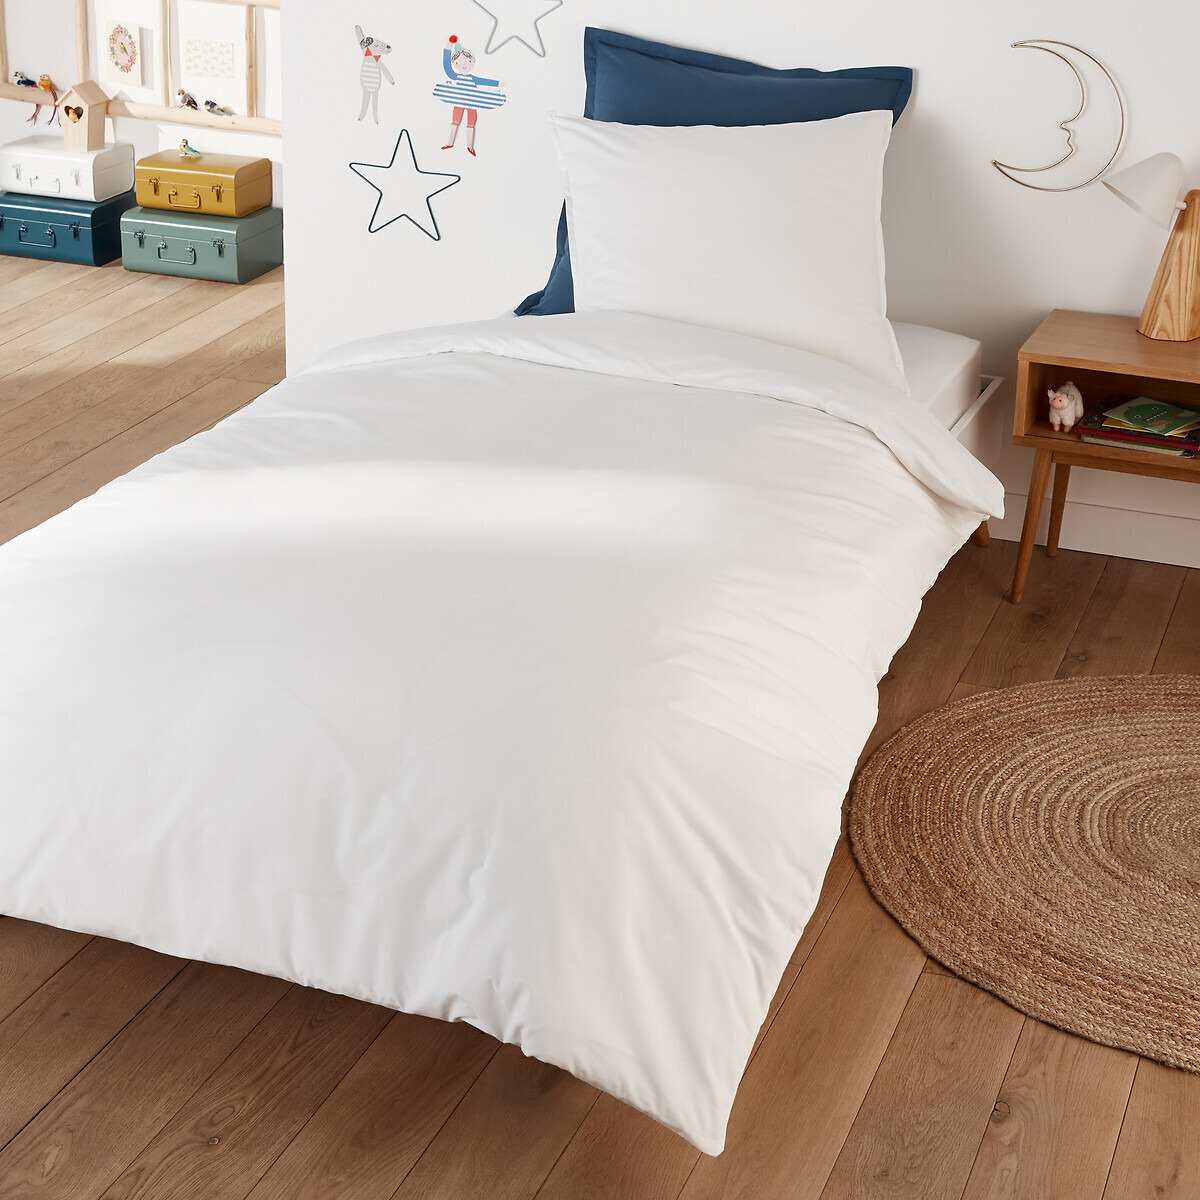 Best Quality Cotton Percale 200 Thread Count Child's Duvet Cover - image 1